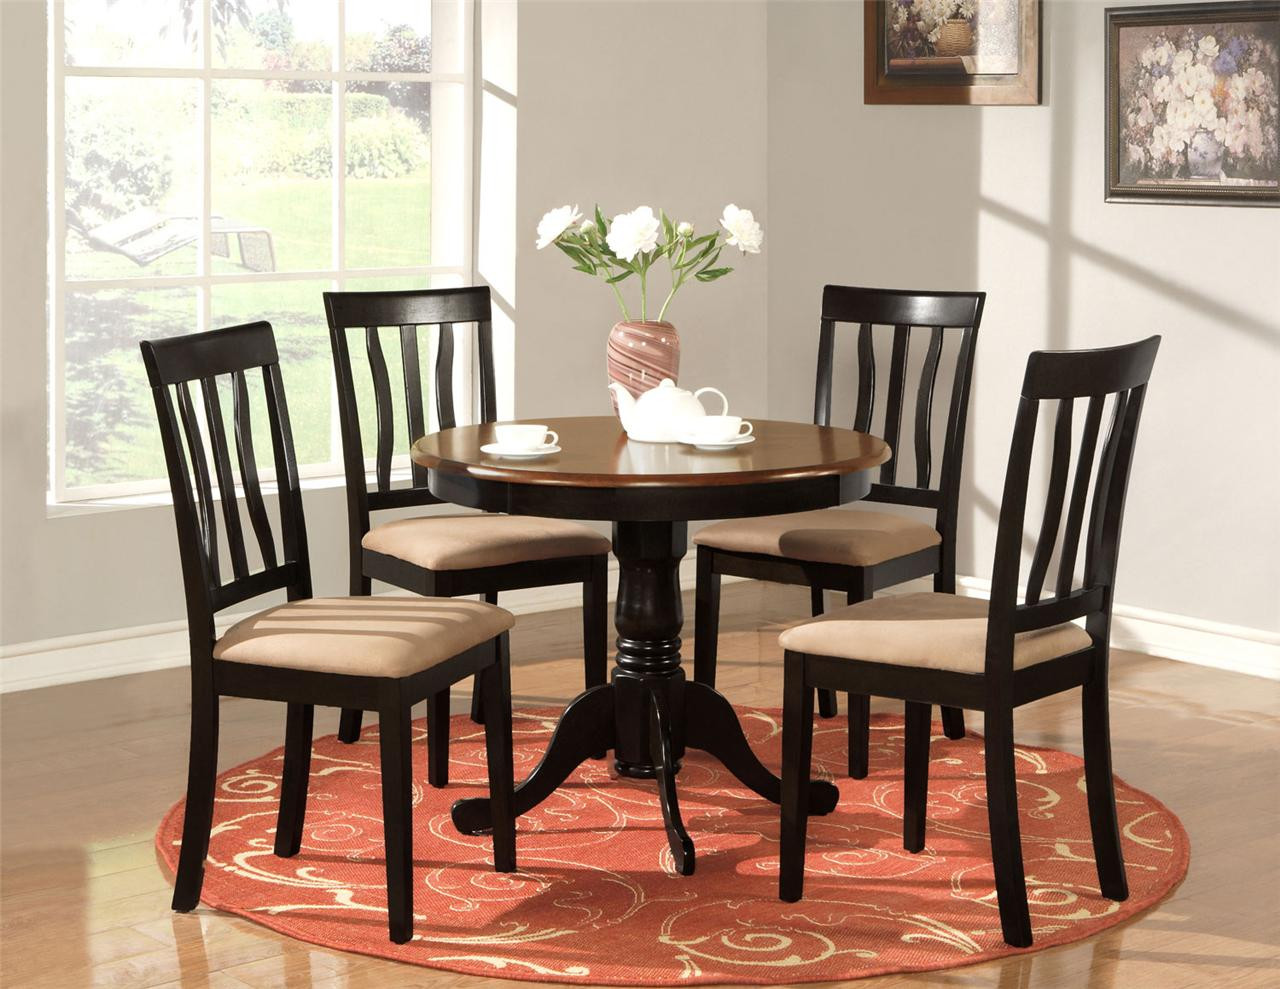 Small Round Kitchen Table Sets
 Square vs Round Kitchen Tables What to Choose Traba Homes